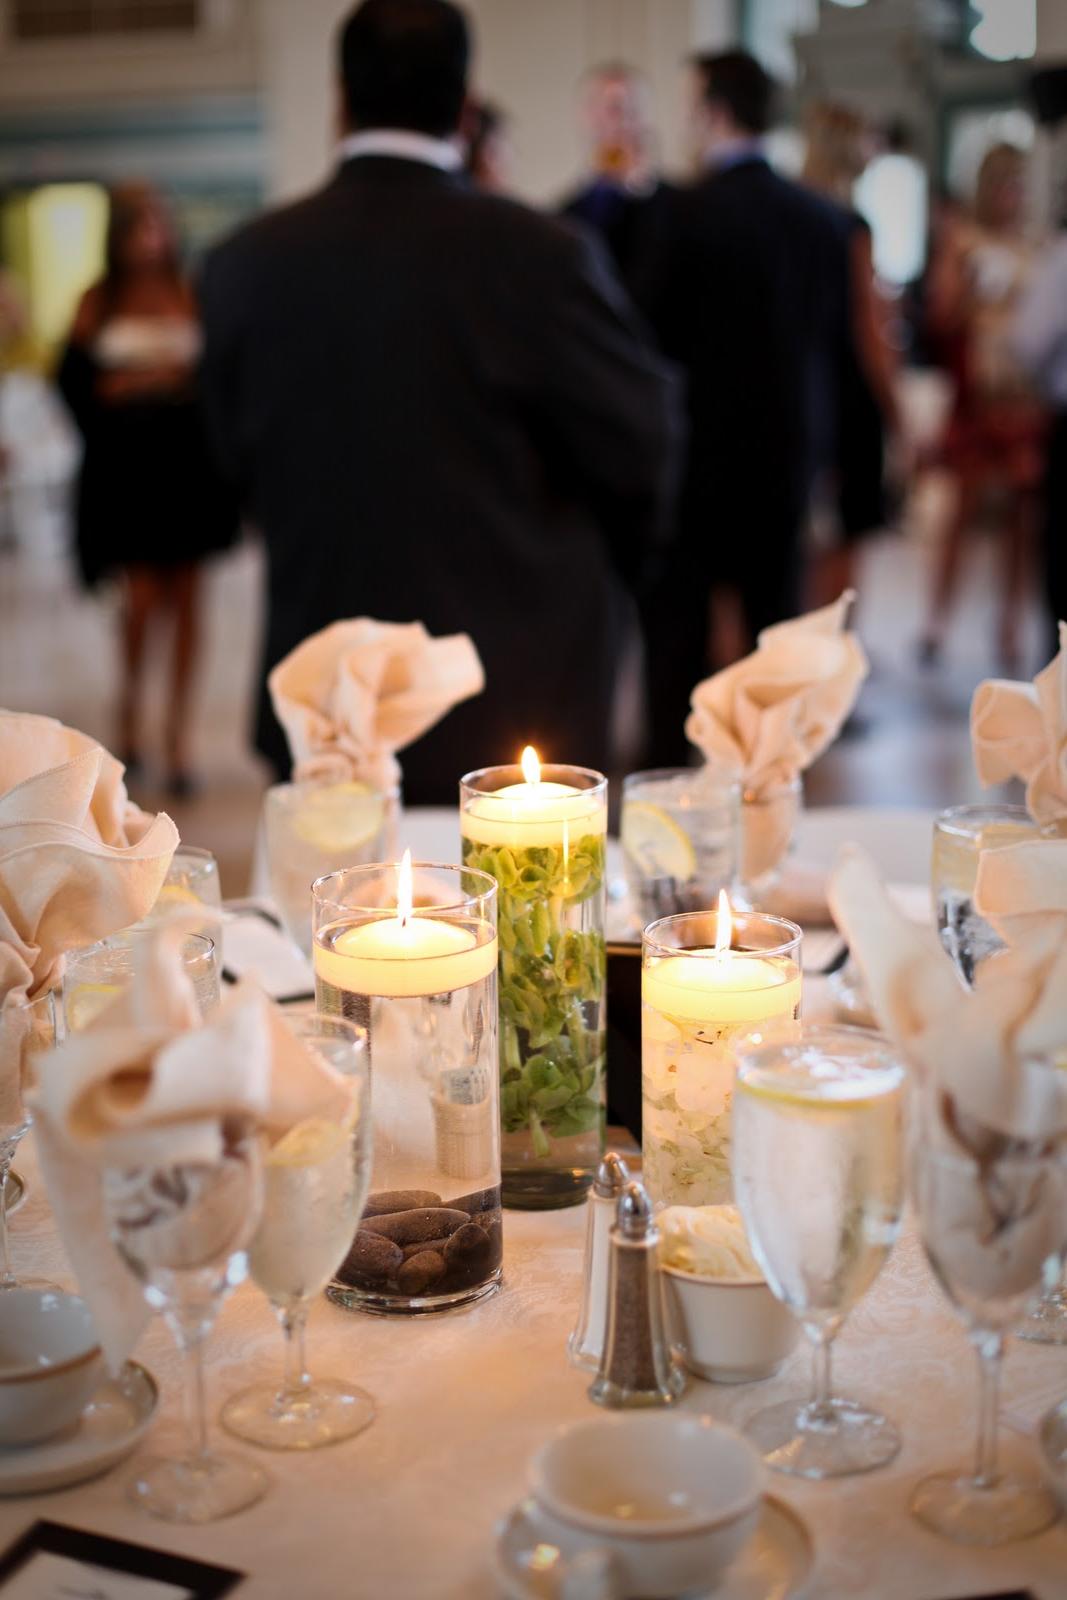 With a love for all things natural, Bethanie chose centerpieces featuring